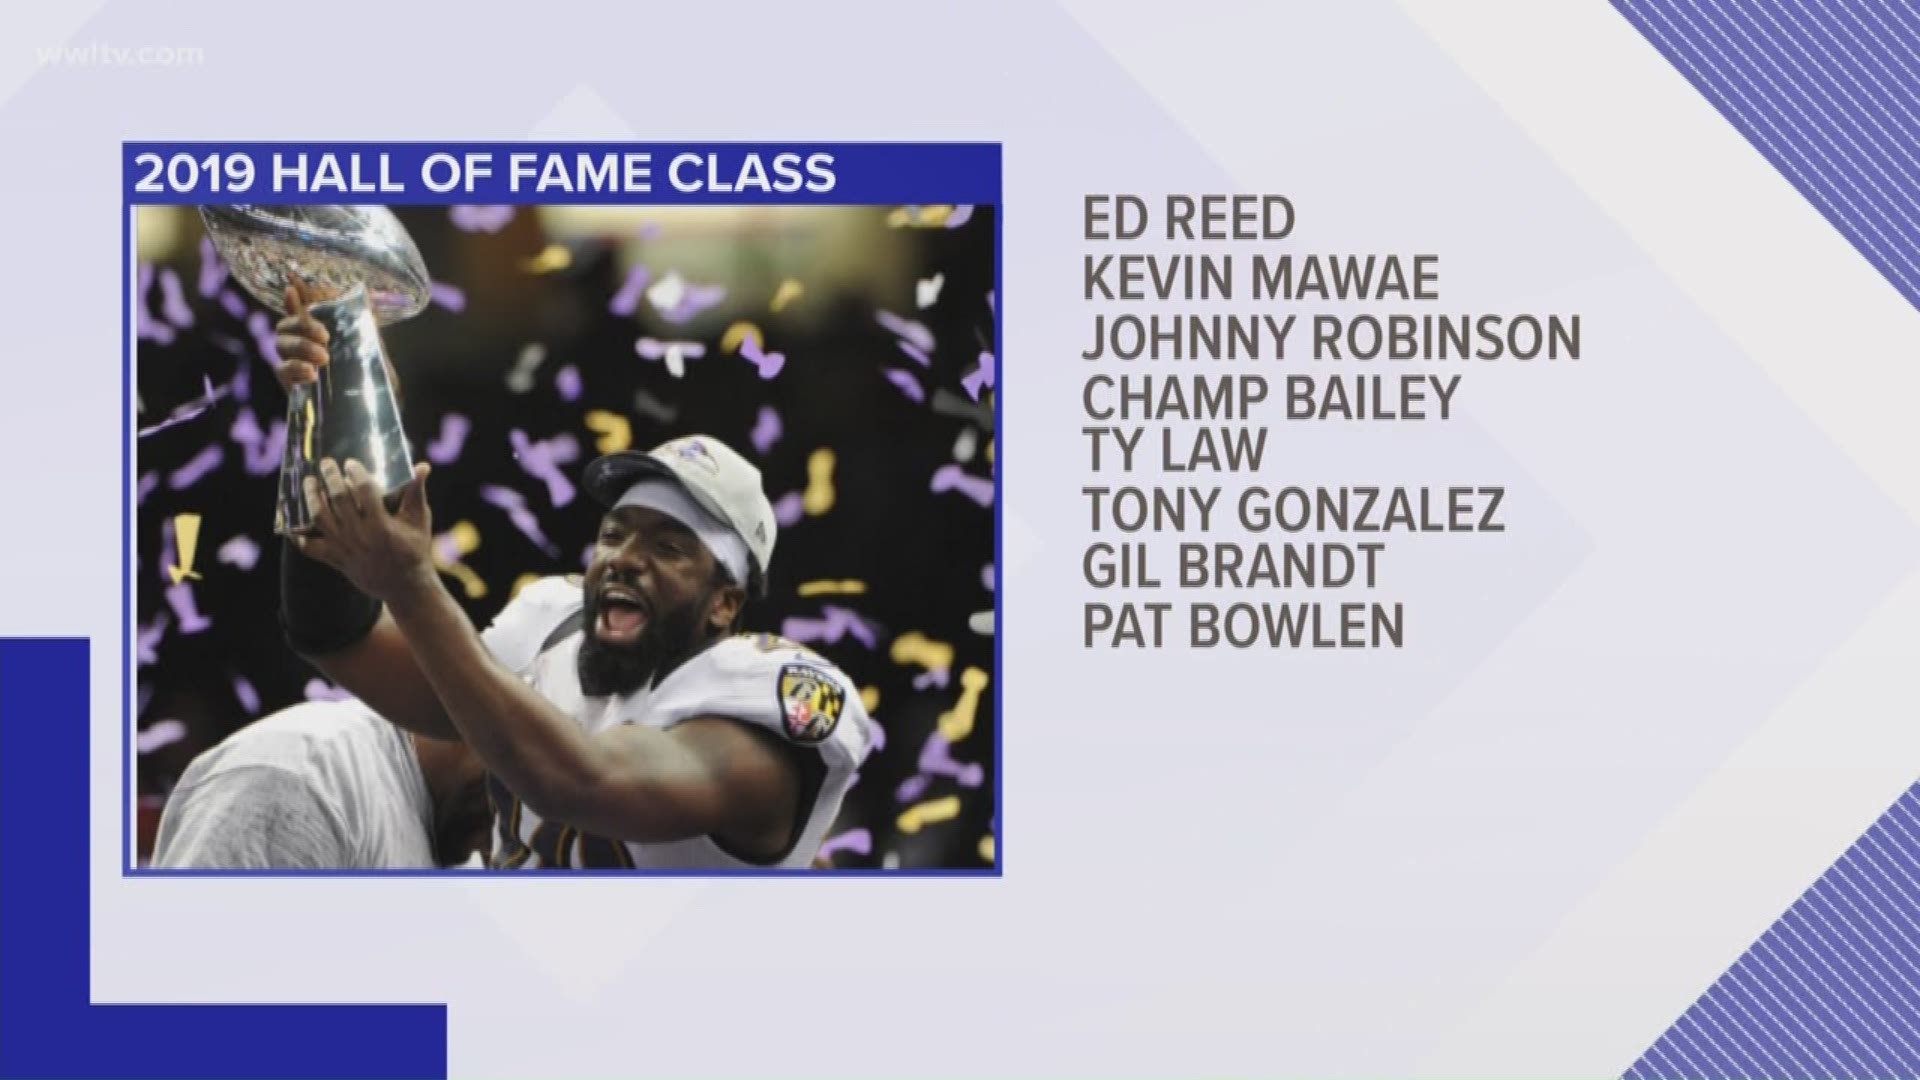 A Louisiana high school football legend and two former LSU stars are a part of the Class of 2019 in the Pro Football Hall of Fame